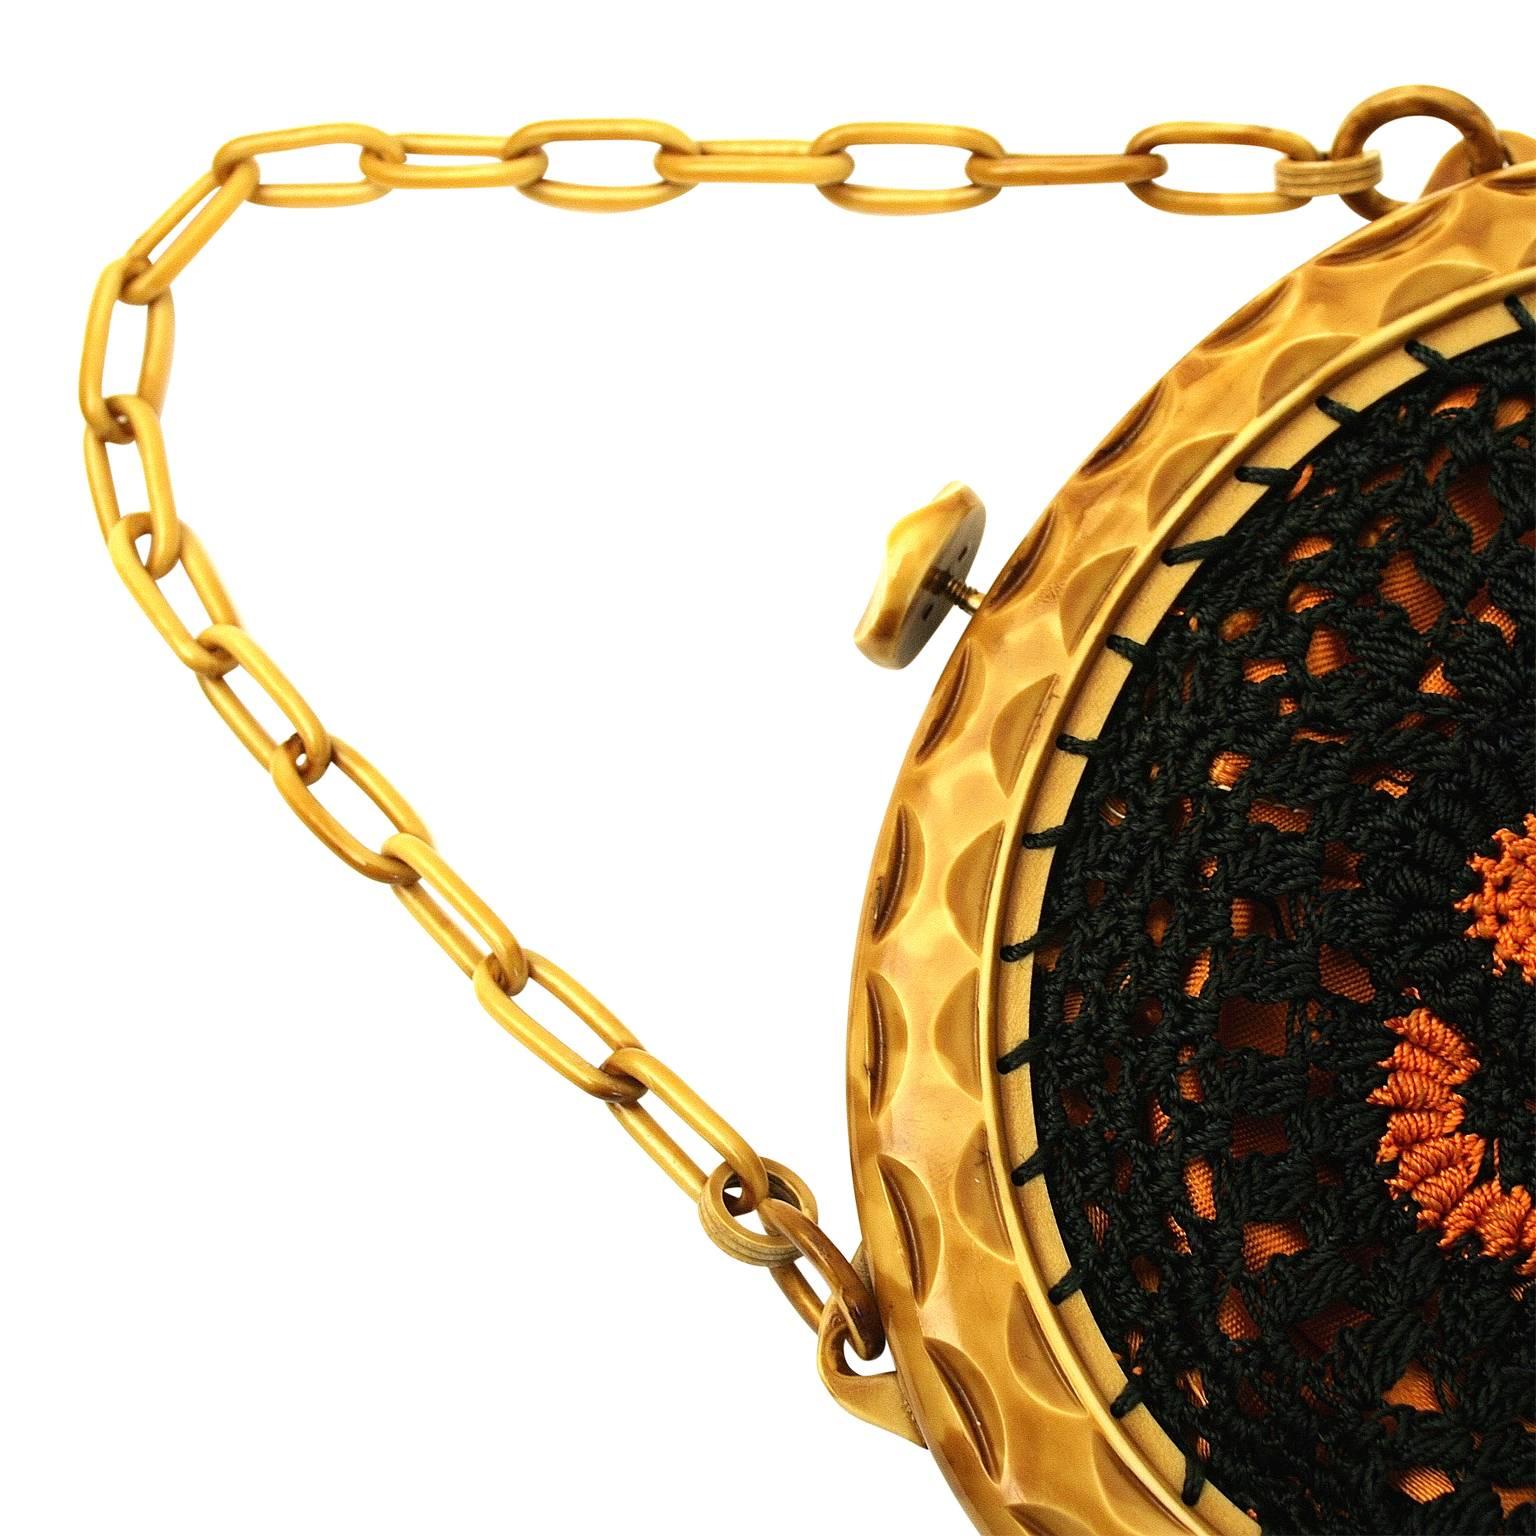 This pretty and evocative bag was created in the 1930s. 
Condition Report:
Excellent
The Details...
This elegant bag is crocheted in orange and blue thread. It features a celluloid frame and celluloid chain handle. The bag opens with a push button